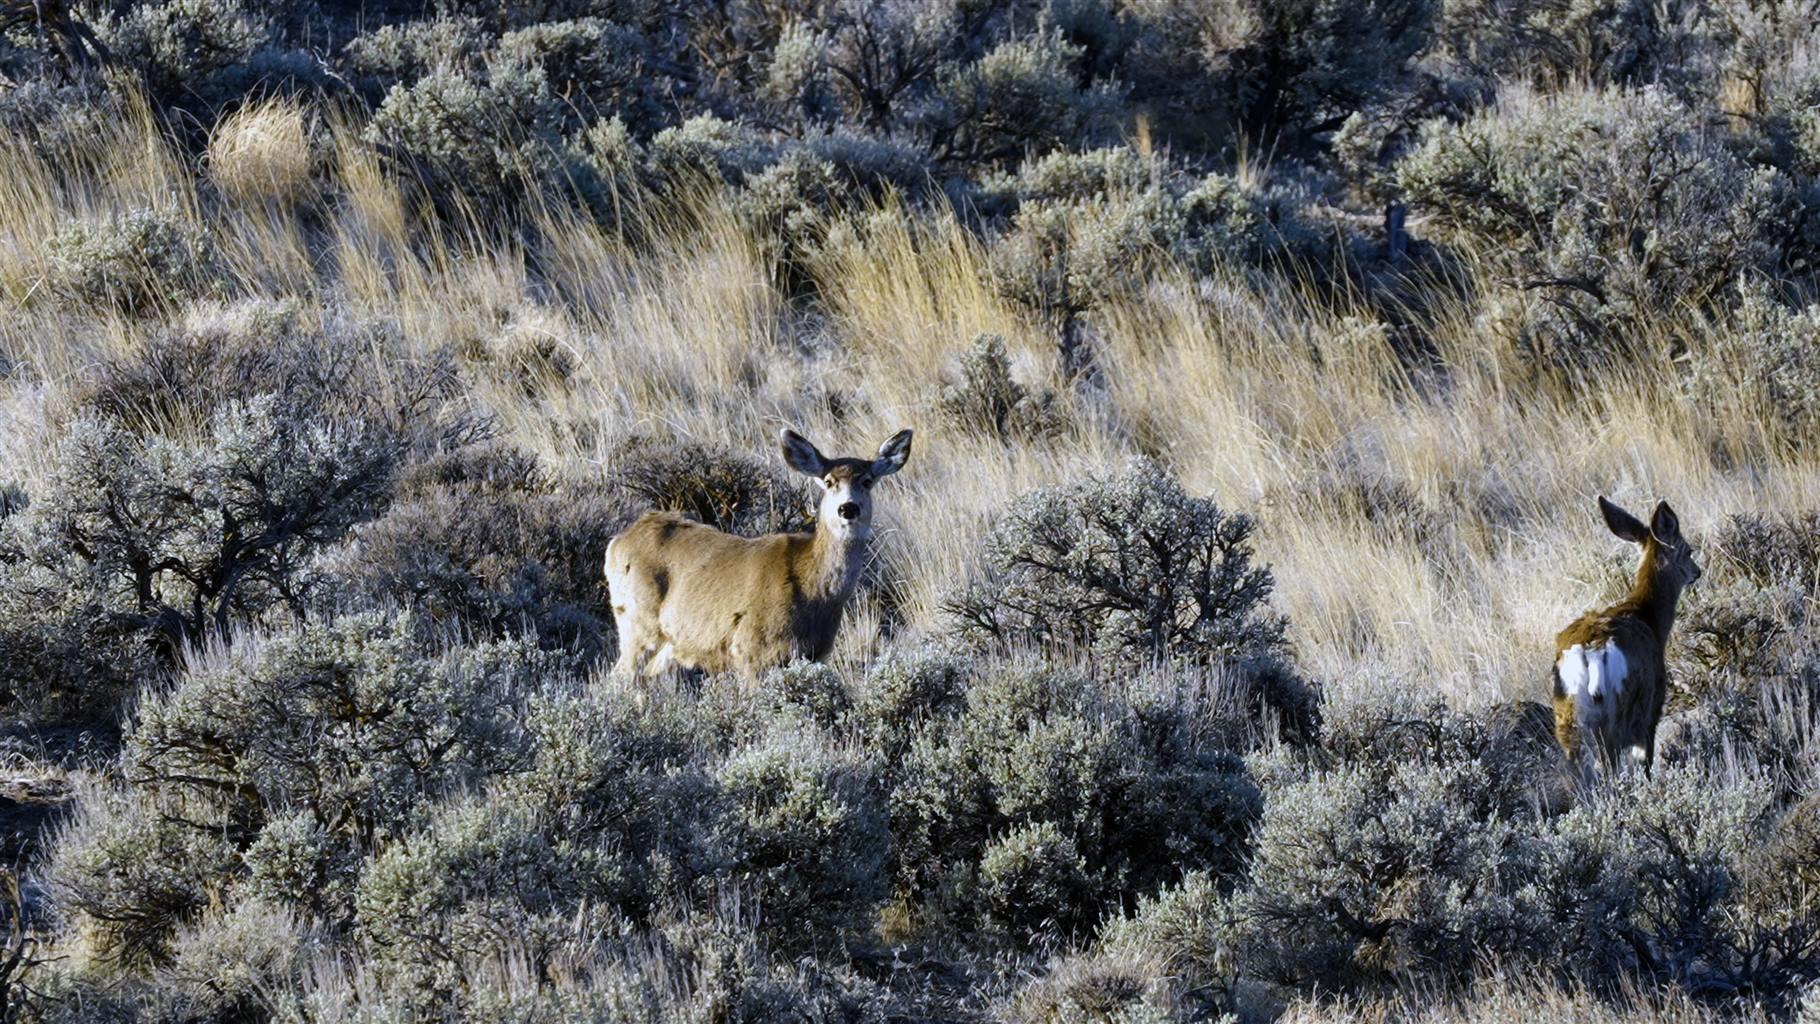 Mule deer graze along a stretch of Highway 20 in Malheur River Canyon in eastern Oregon. After analyzing data from collars, the Burns Paiute Tribe found that mule deer populations have declined by 20% to 40% in the Malheur Canyon area. 